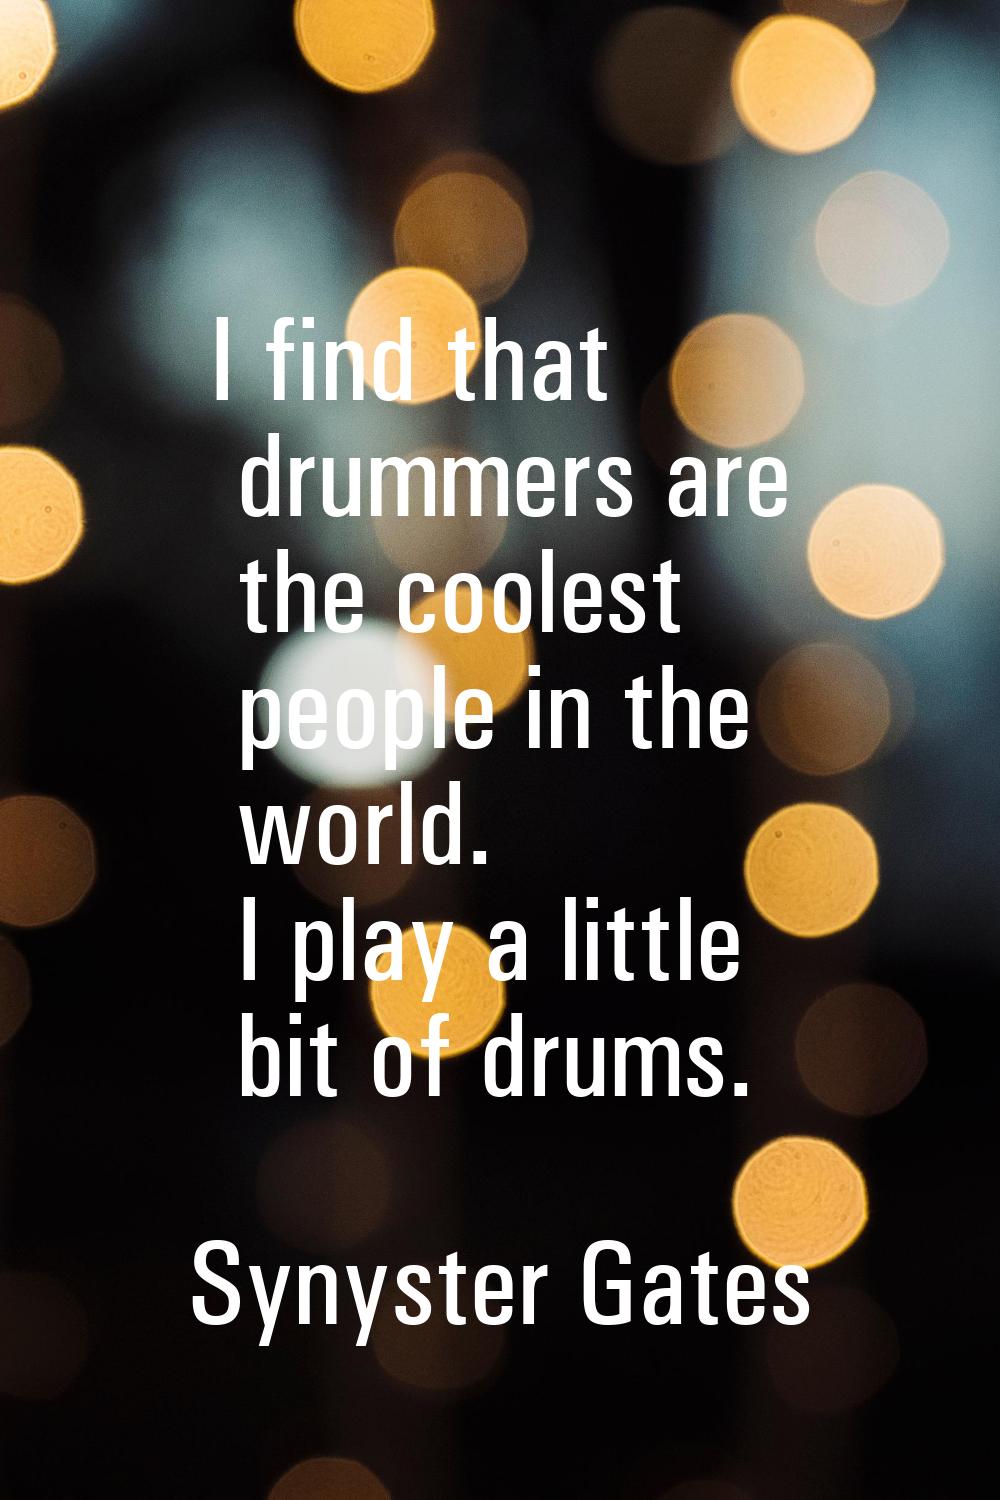 I find that drummers are the coolest people in the world. I play a little bit of drums.